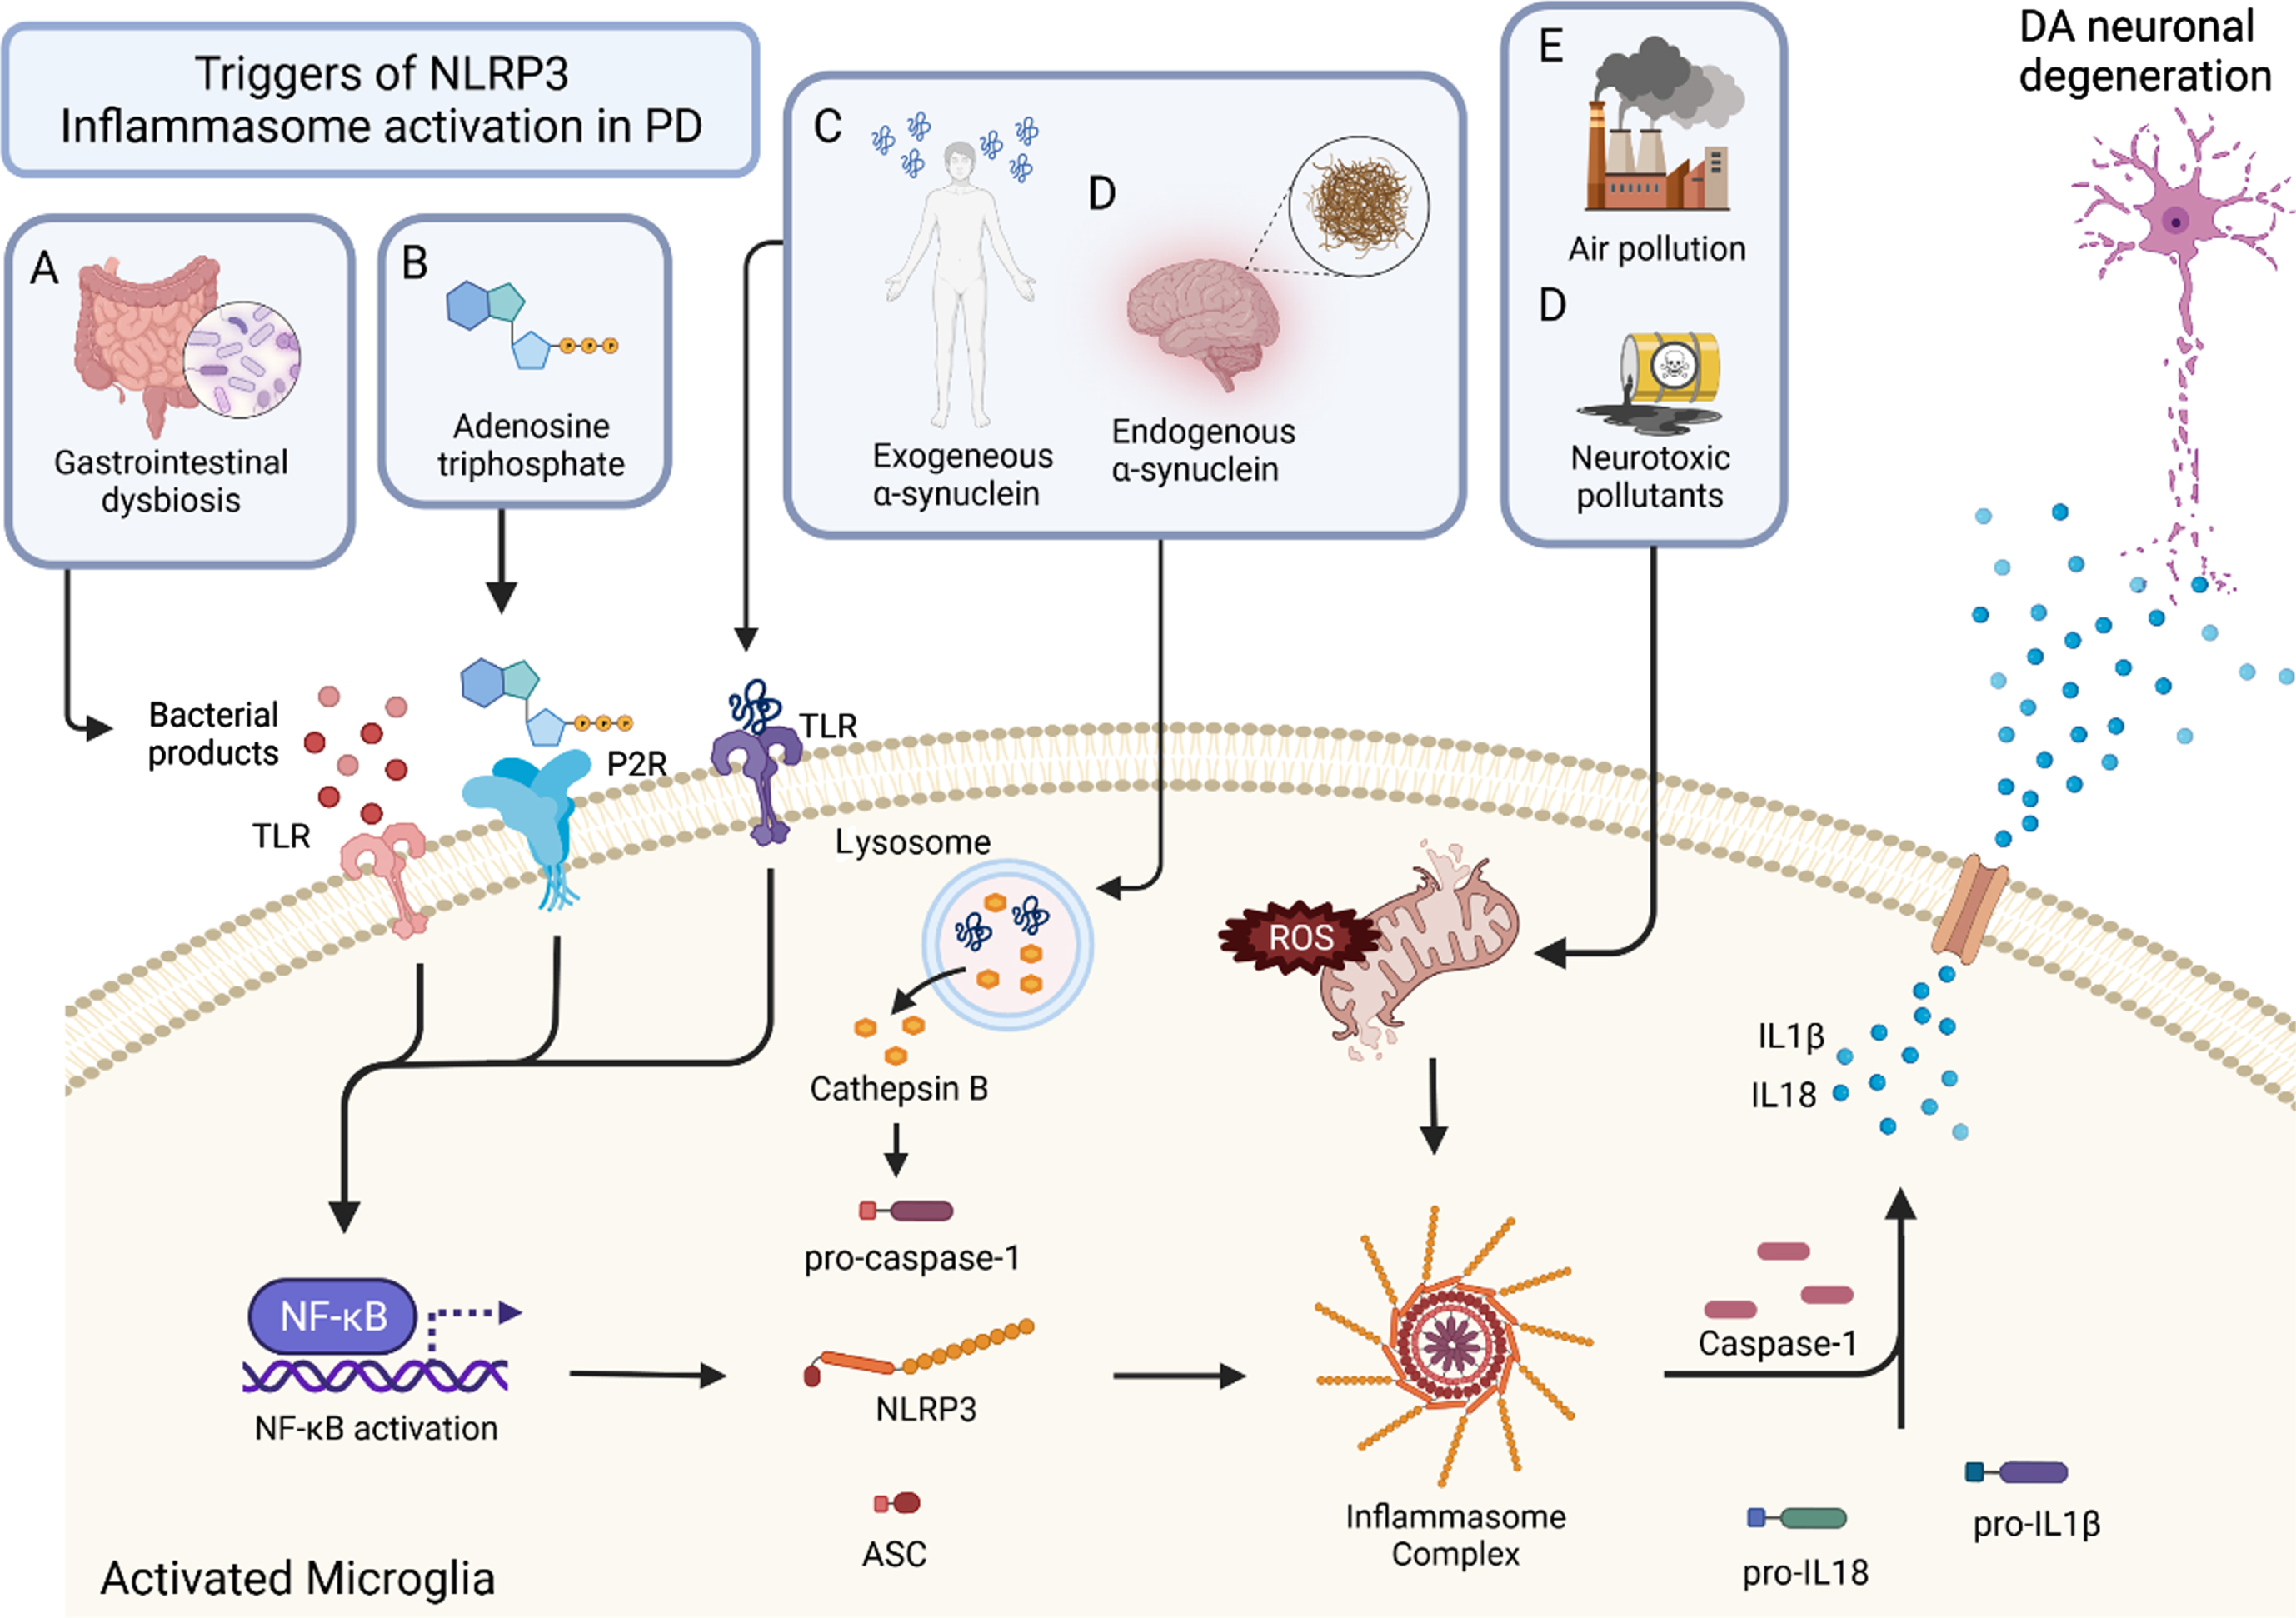 Triggers and mechanisms of inflammasome activation in PD. Activation of the inflammasome can come from a variety of sources. Triggers of the inflammasome A, B, and C result in the activation of NFκB. This priming step leads to the production of NLRP3, ASC, pro-caspase-1, pro-IL18, and pro IL1B. With activation, the inflammasome complex is formed, which cleaves pro-caspase-1 to the active form, caspase-1. Caspase-1 then cleaves the pro-forms of IL1β and IL18 to give their mature, active forms. These inflammatory cytokines are secreted from the microglia and lead to DA neuronal degeneration. Bacterial products of gastrointestinal dysbiosis (A) interact with TLRs which activate NFκB. Adenosine triphosphate (ATP) (B) activates P2Rs leading to NFκB activation. Exogenous α-synuclein (C) and endogenous α-synuclein (D) interact with TLRs as well, leading to the activation of NFκB. Air pollution (E) and neurotoxic pollutants (F) cause mitochondrial stress and result in the production of ROS which leads to inflammasome formation and ultimately inflammatory cytokine production.